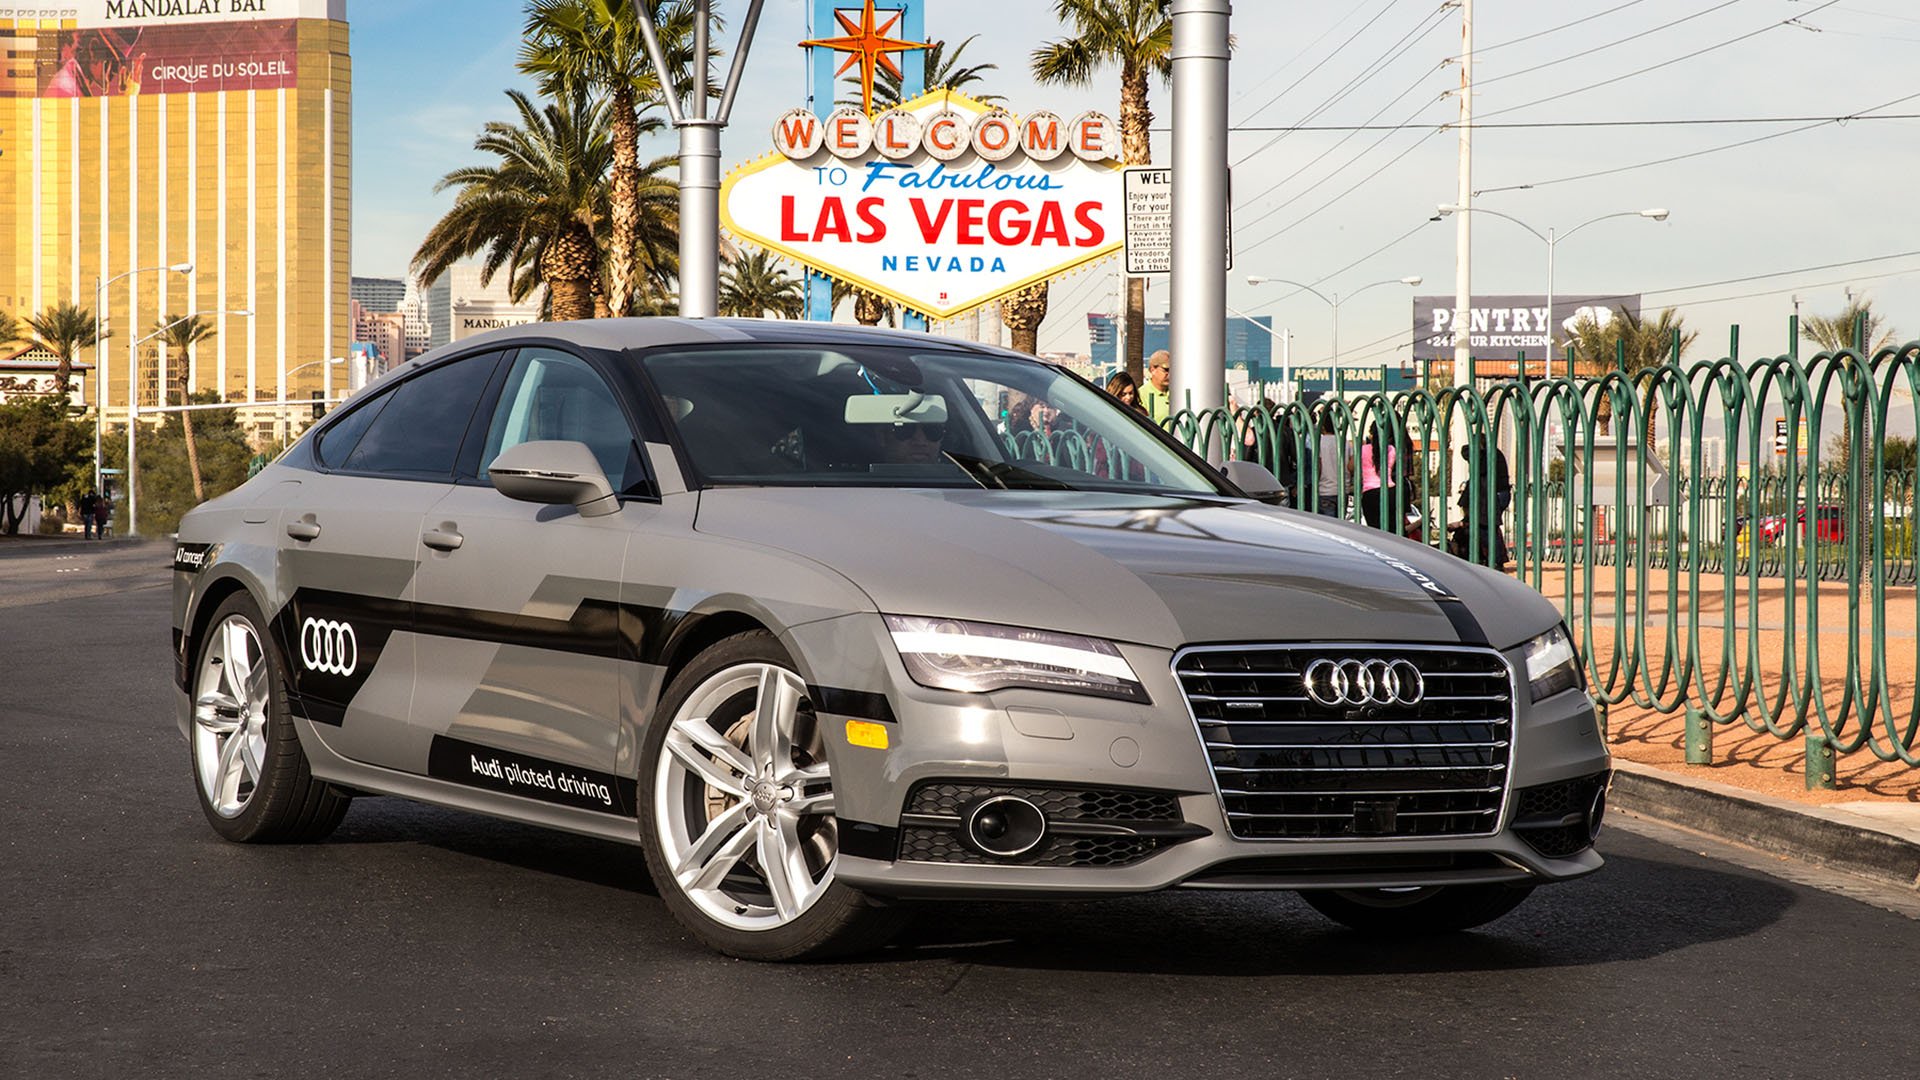 Audi piloted A7 at CES 2015 © Volkswagen AG